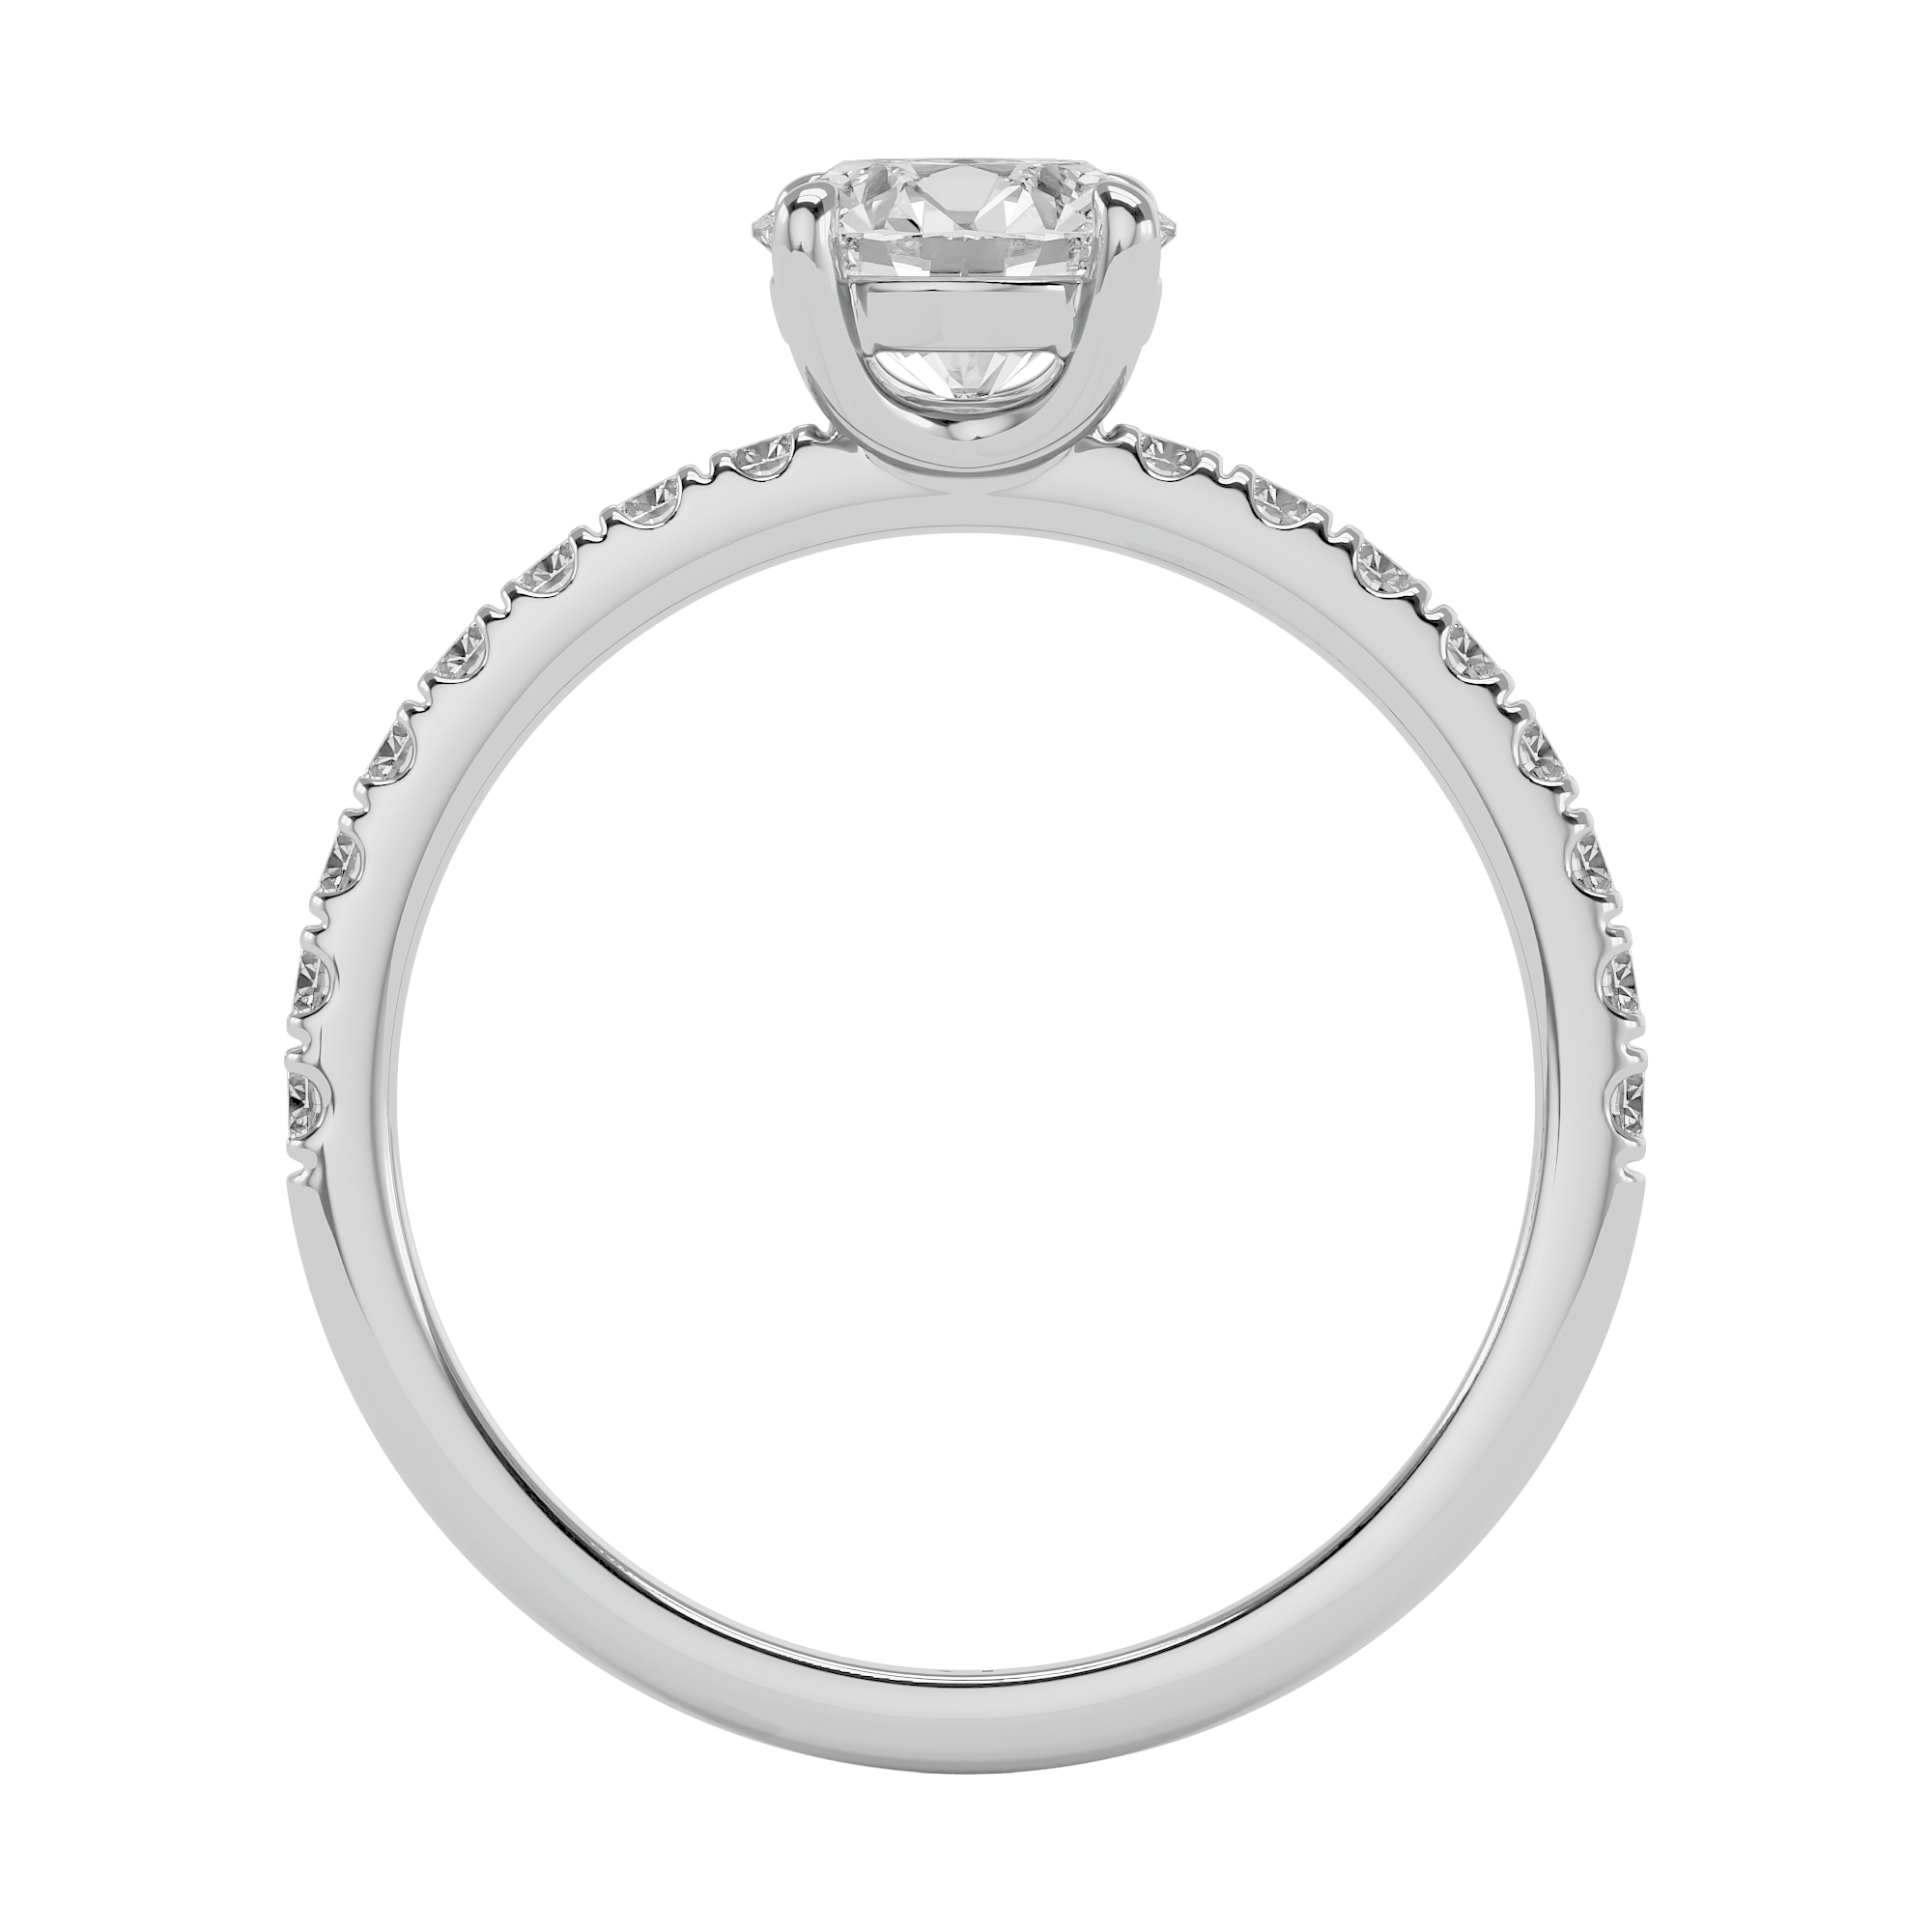 1.14 Ct Solitaire Lab Grown Diamond Ring in White Gold